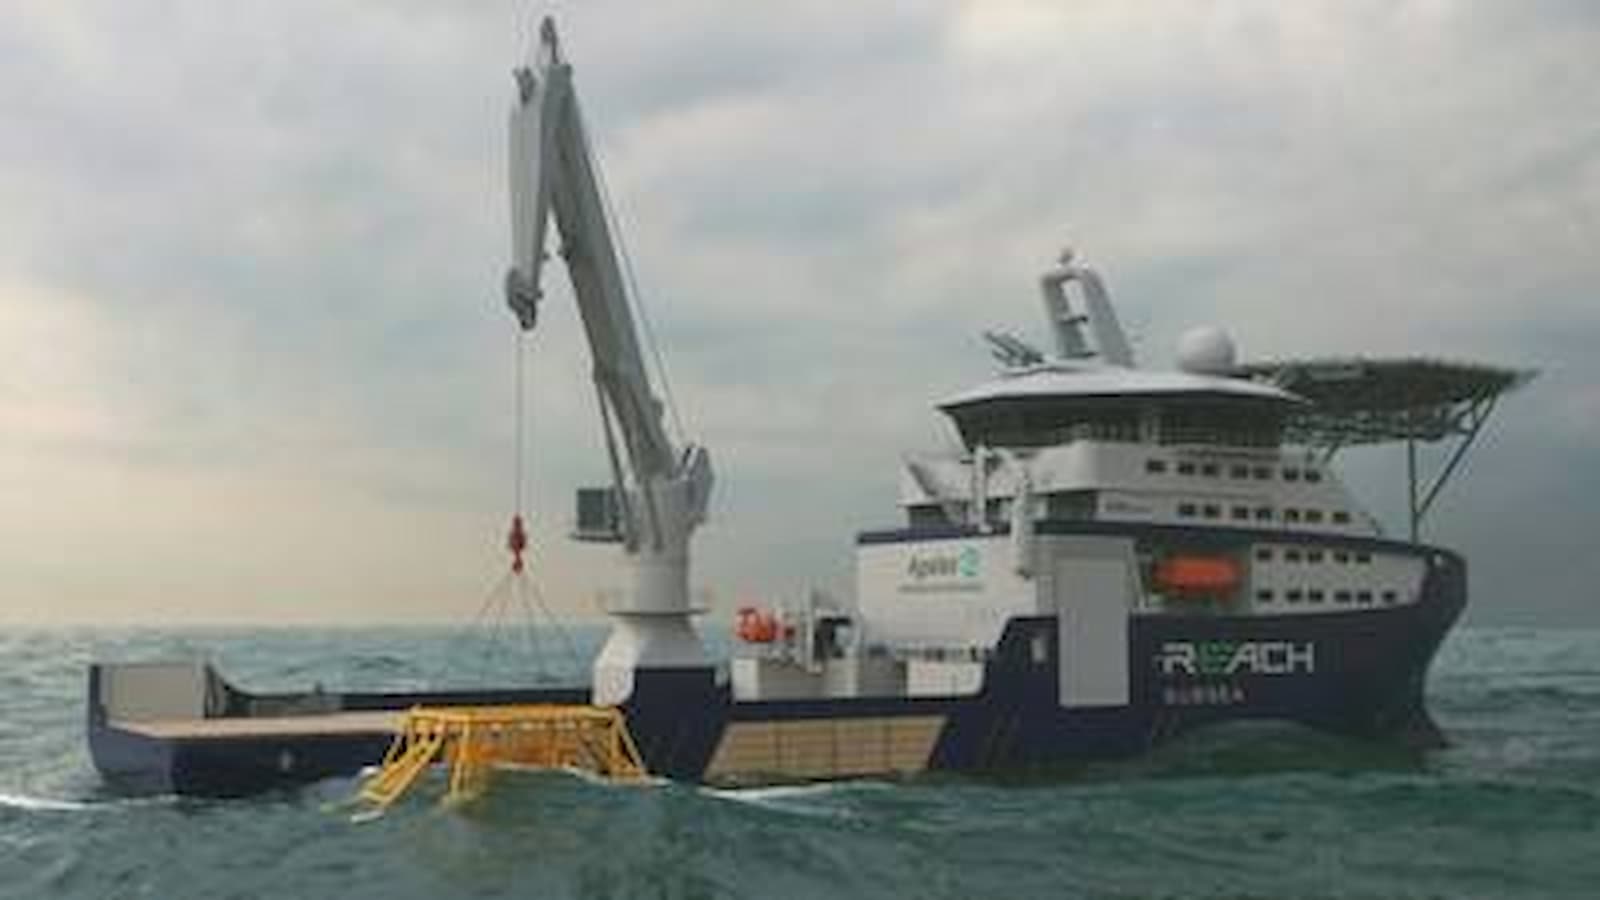 Eidesvik-Agalas Joint Venture to Construct New IMR Vessel for Charter with Reach Subsea